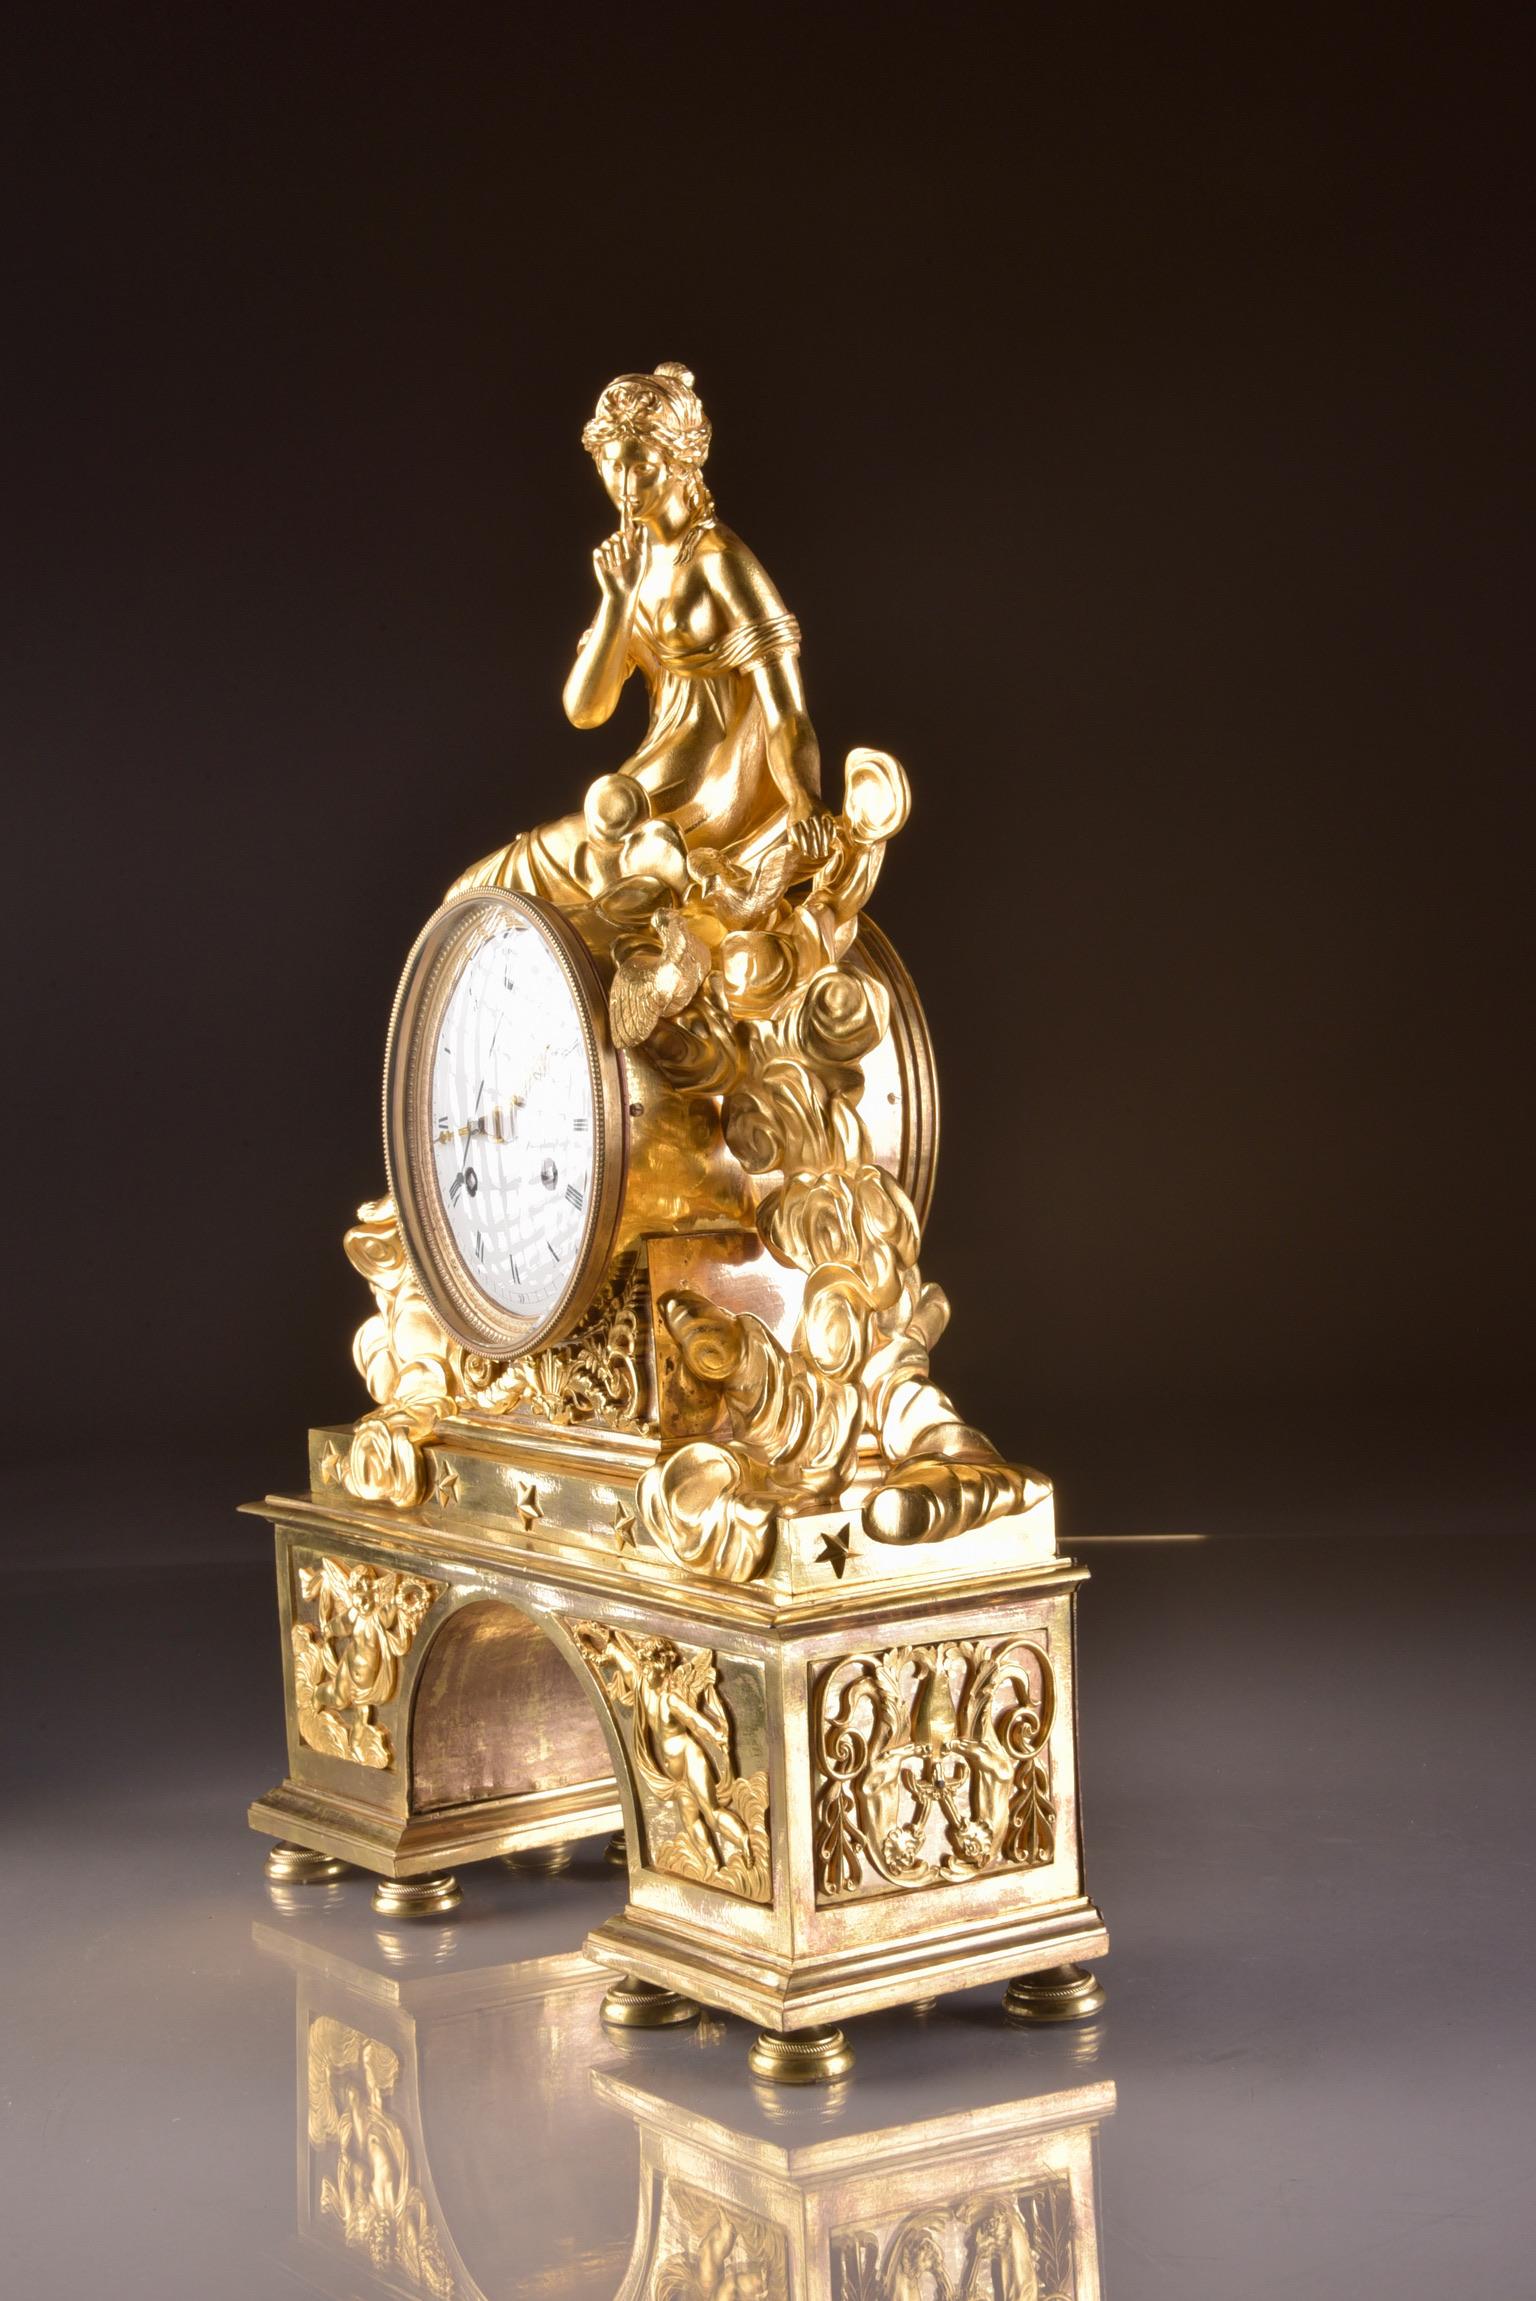 Rare Large Romantic French Directoire Mantel Clock, Late 18th C For Sale 10